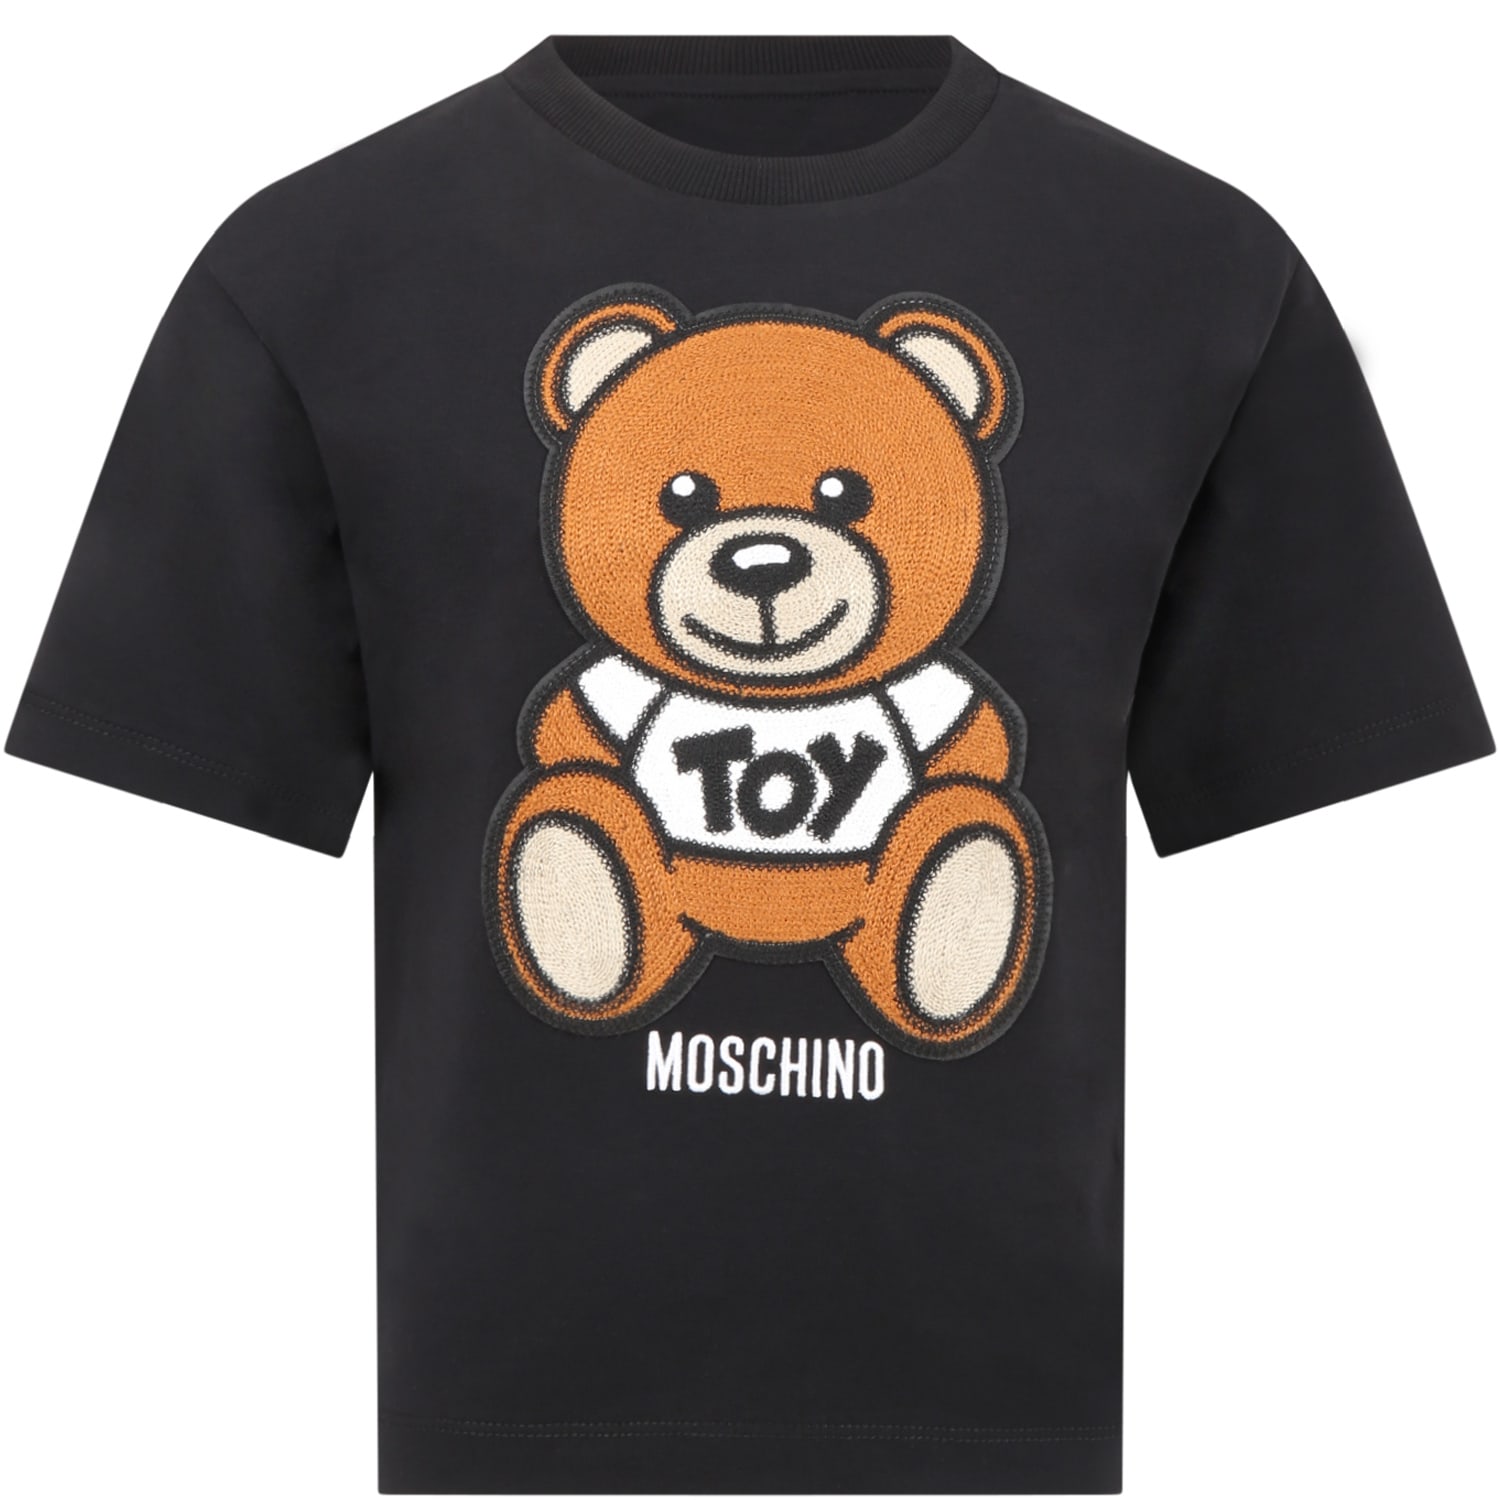 Moschino Black T-shirt For Kids With Teddy Bear